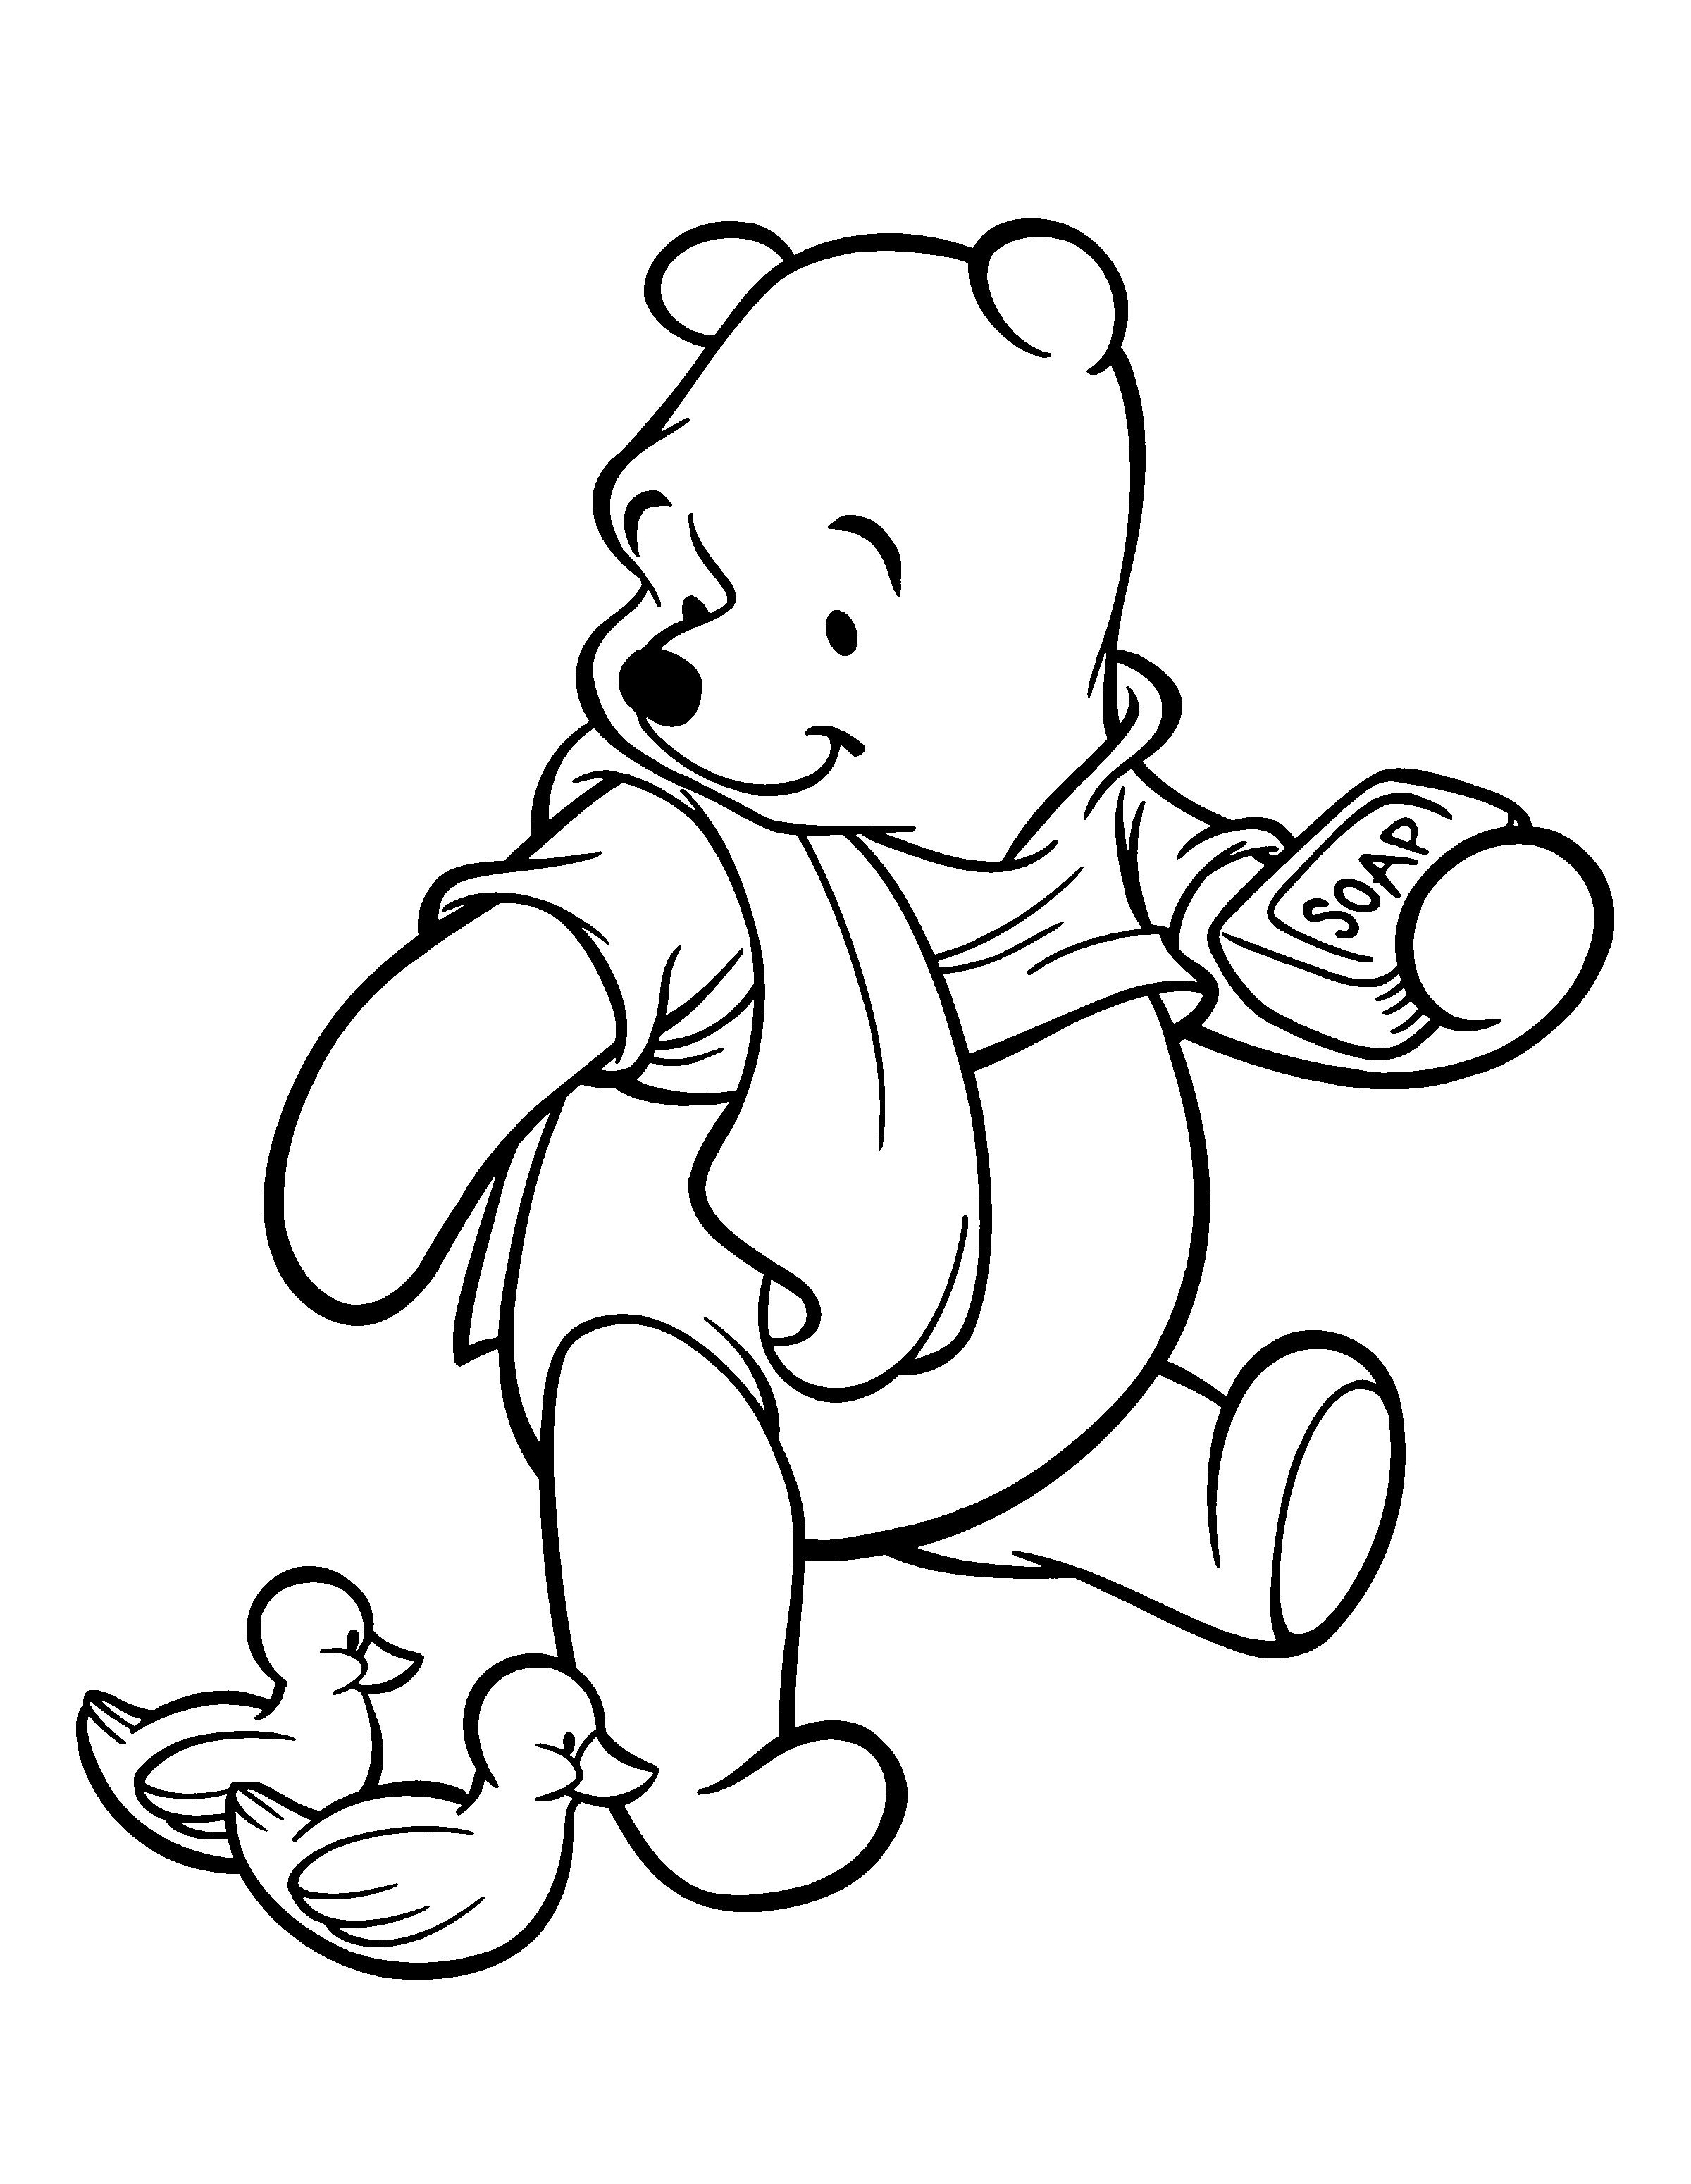 coloring pages of disney characters disney characters coloring pages getcoloringpagescom coloring disney pages characters of 